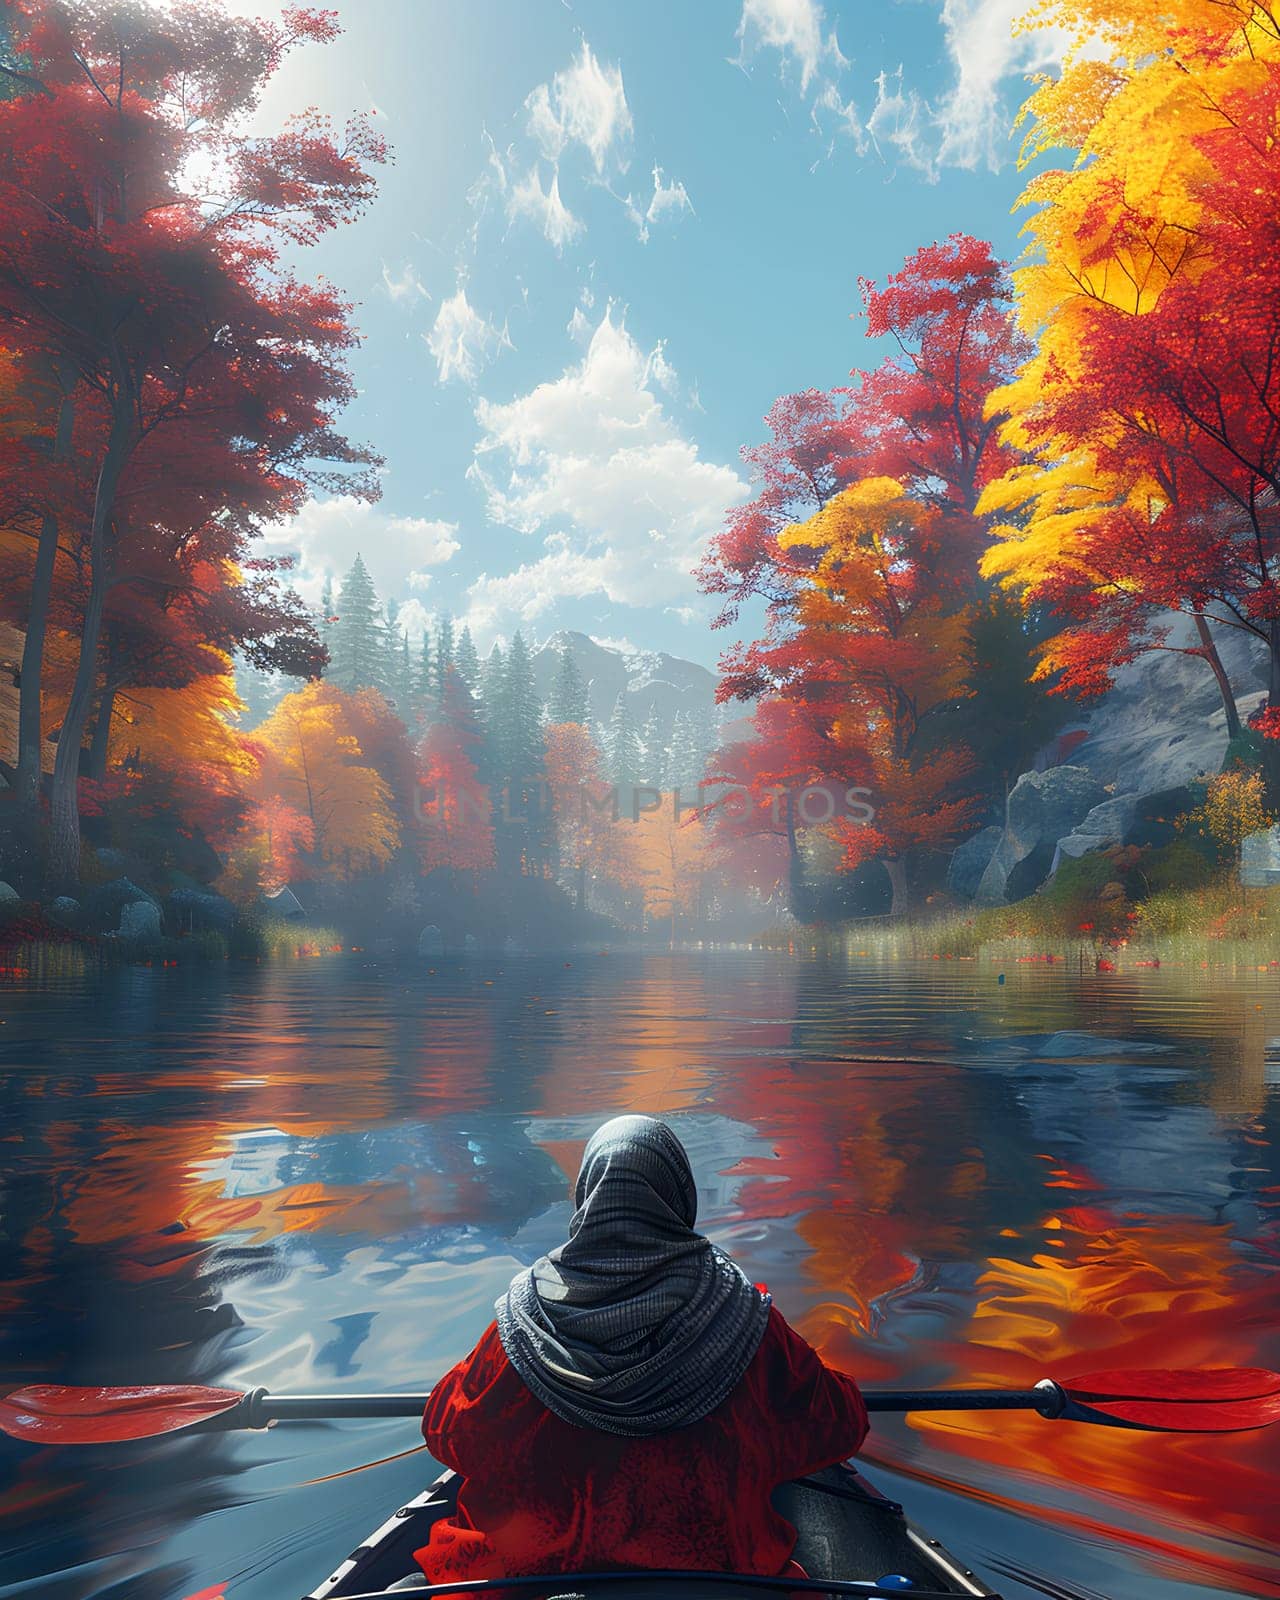 A person in a red jacket paddles a canoe on the river by Nadtochiy